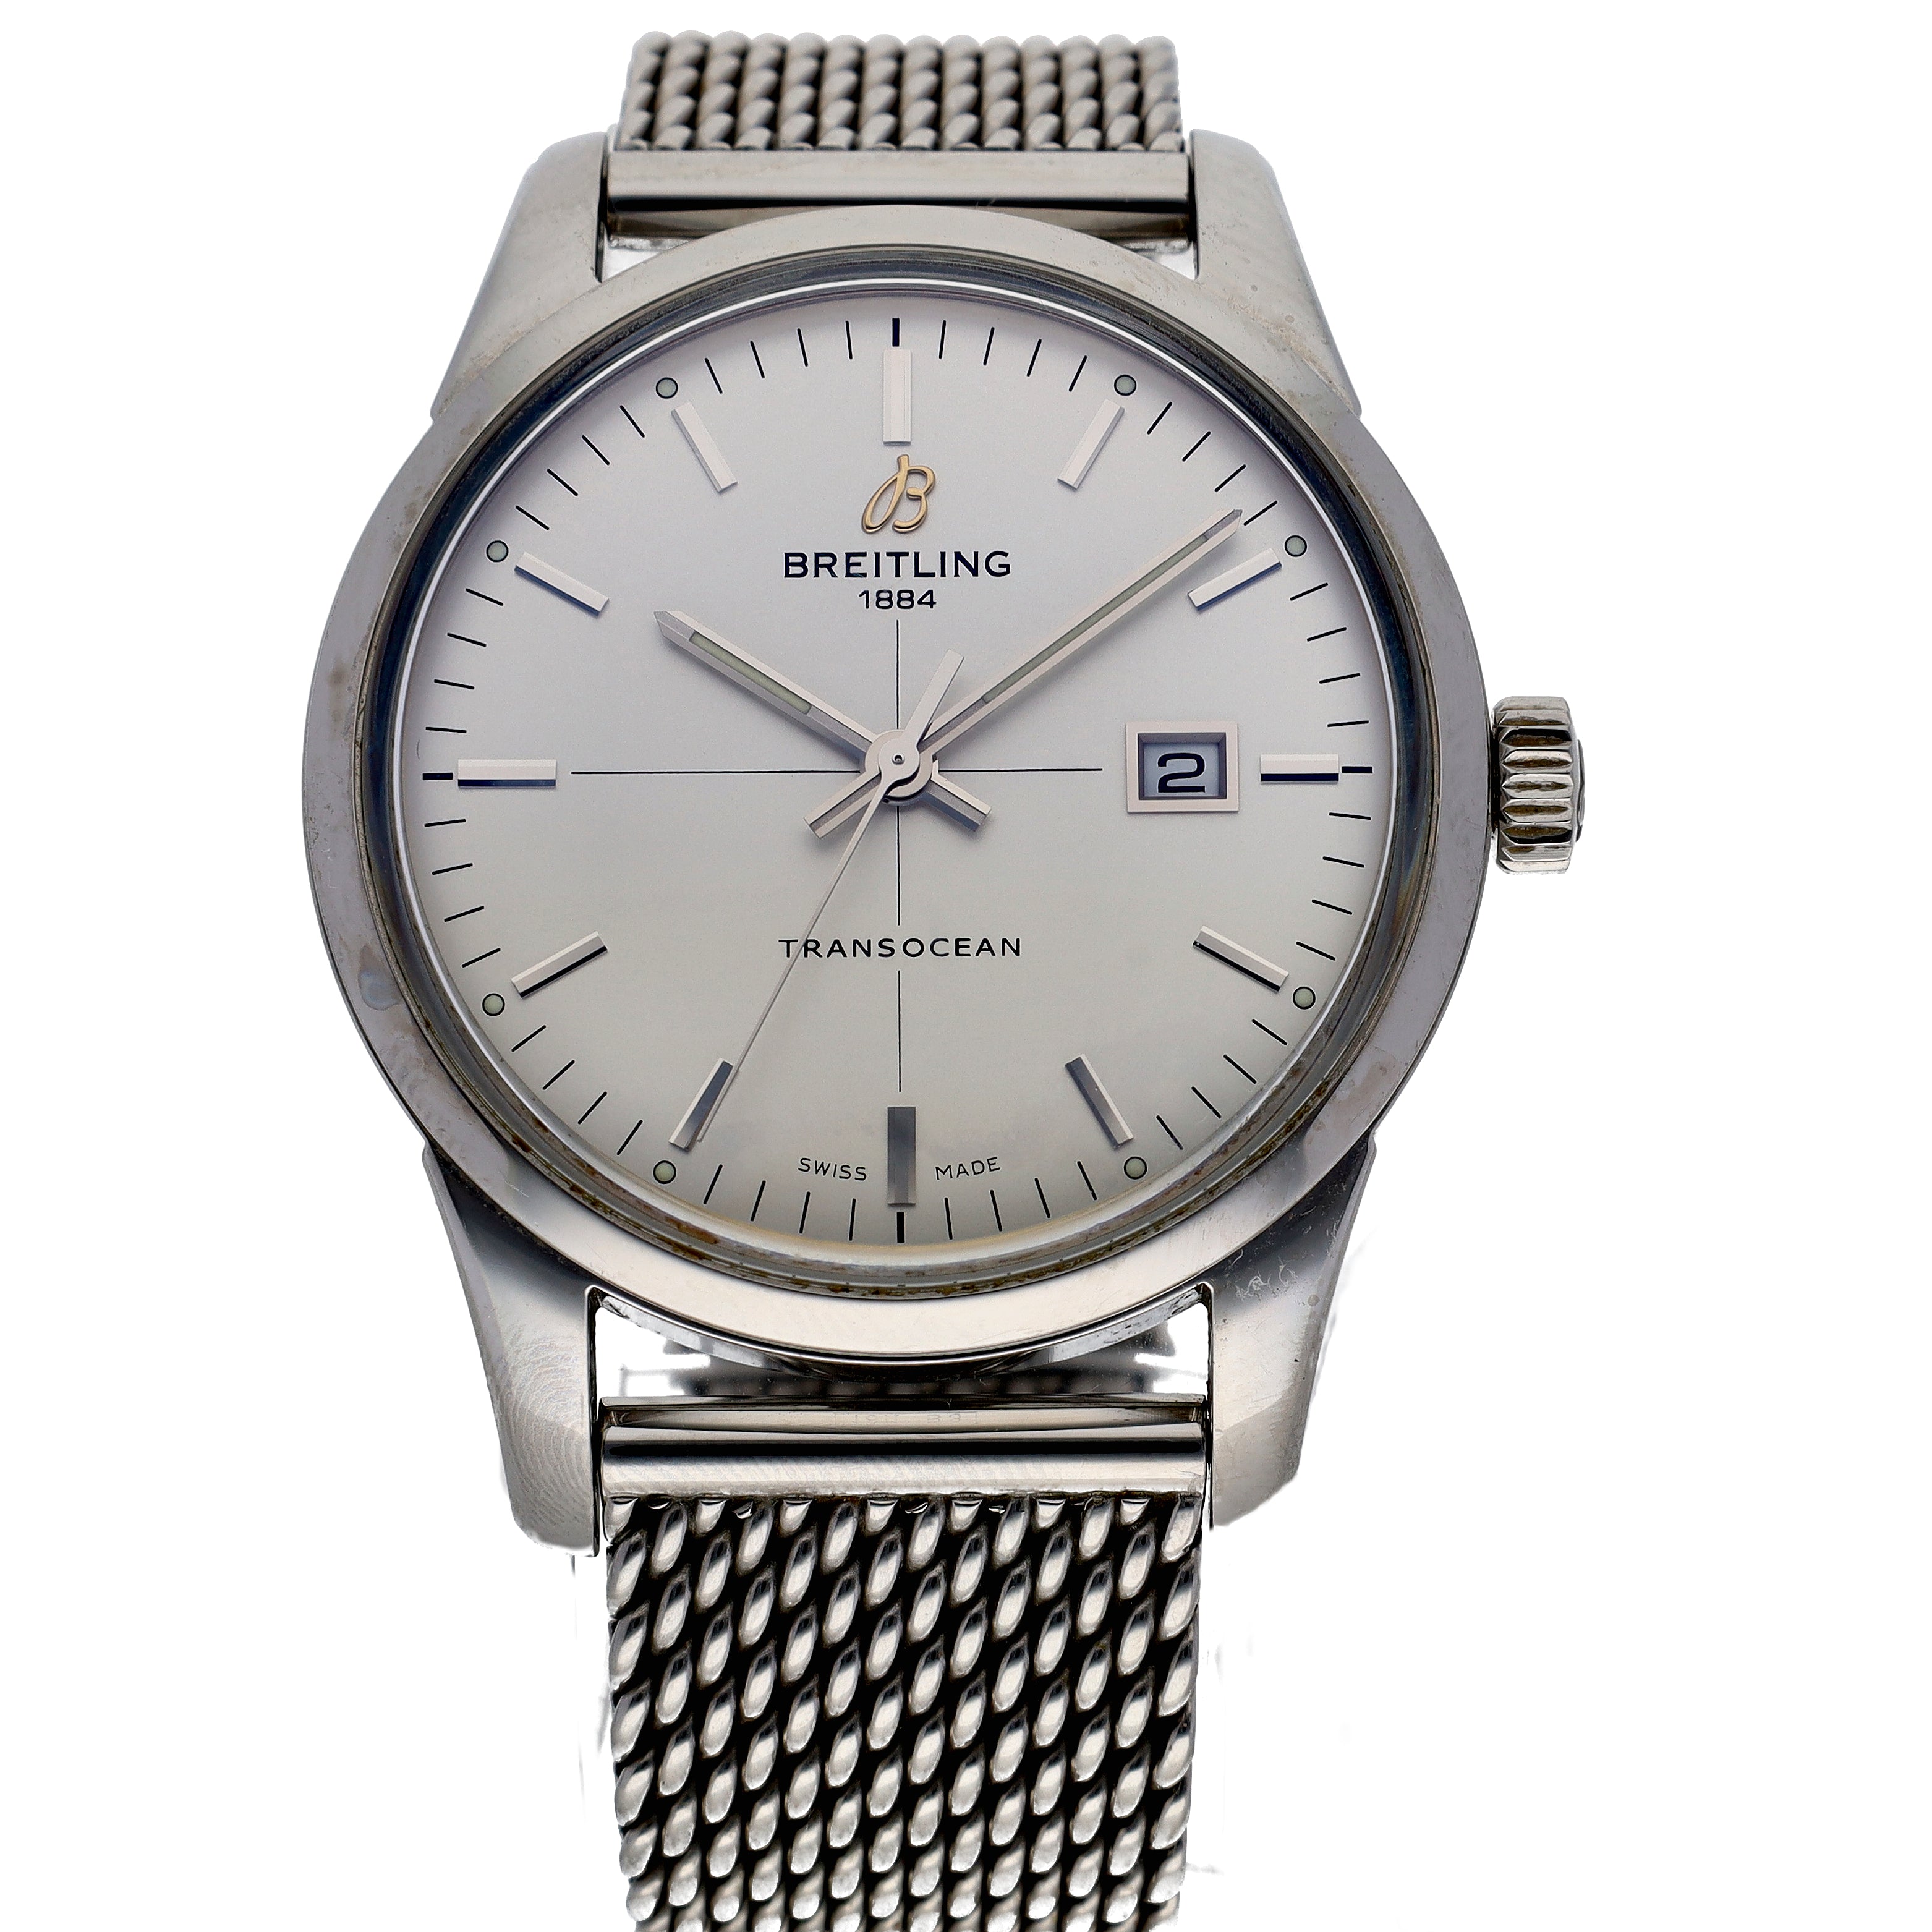 Breitling Transocean A10360 Automatic 43mm Stainless Steel Watch